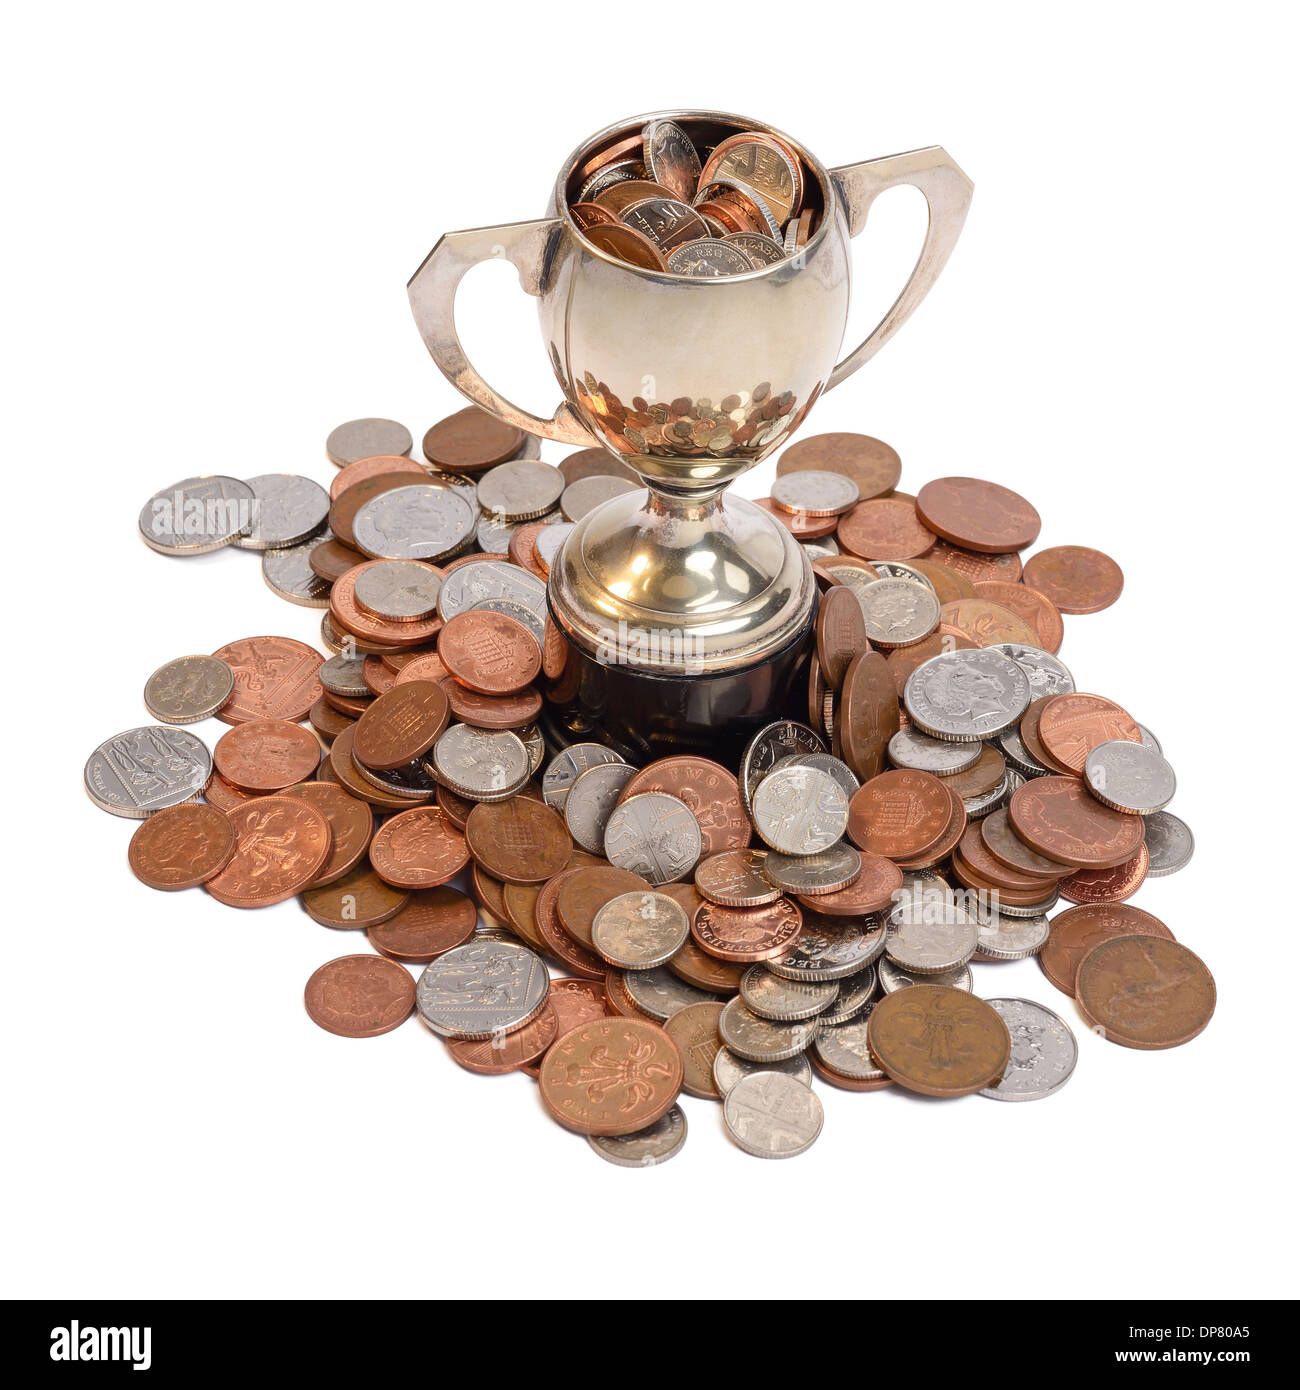 Silver trophy in the middle of a pile of coins Stock Photo